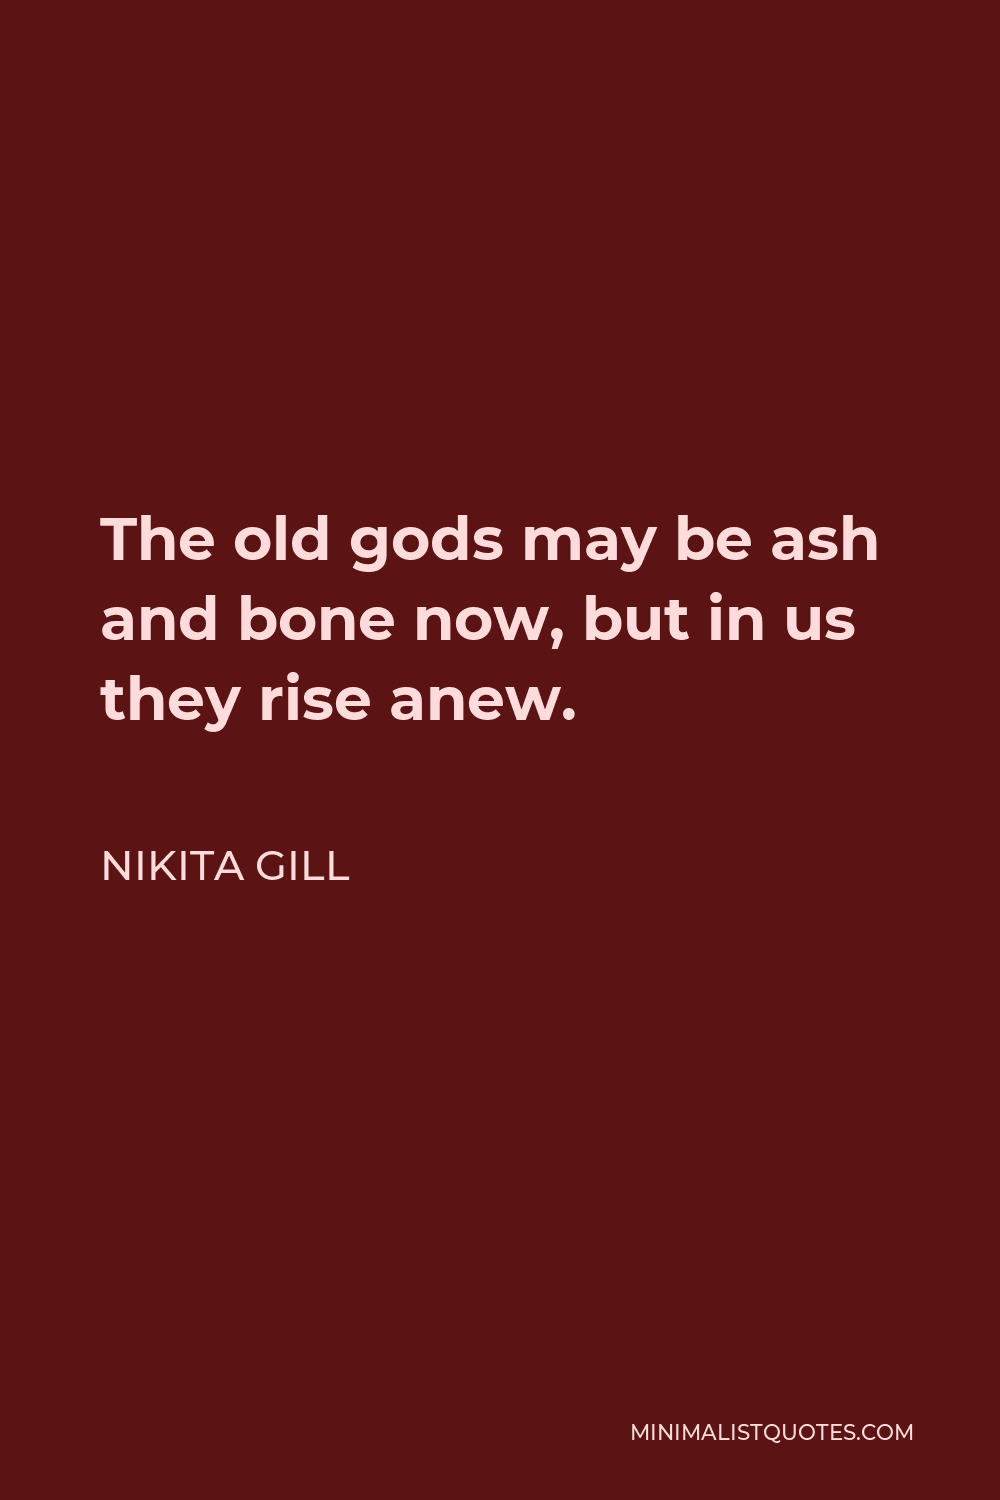 Nikita Gill Quote - The old gods may be ash and bone now, but in us they rise anew.